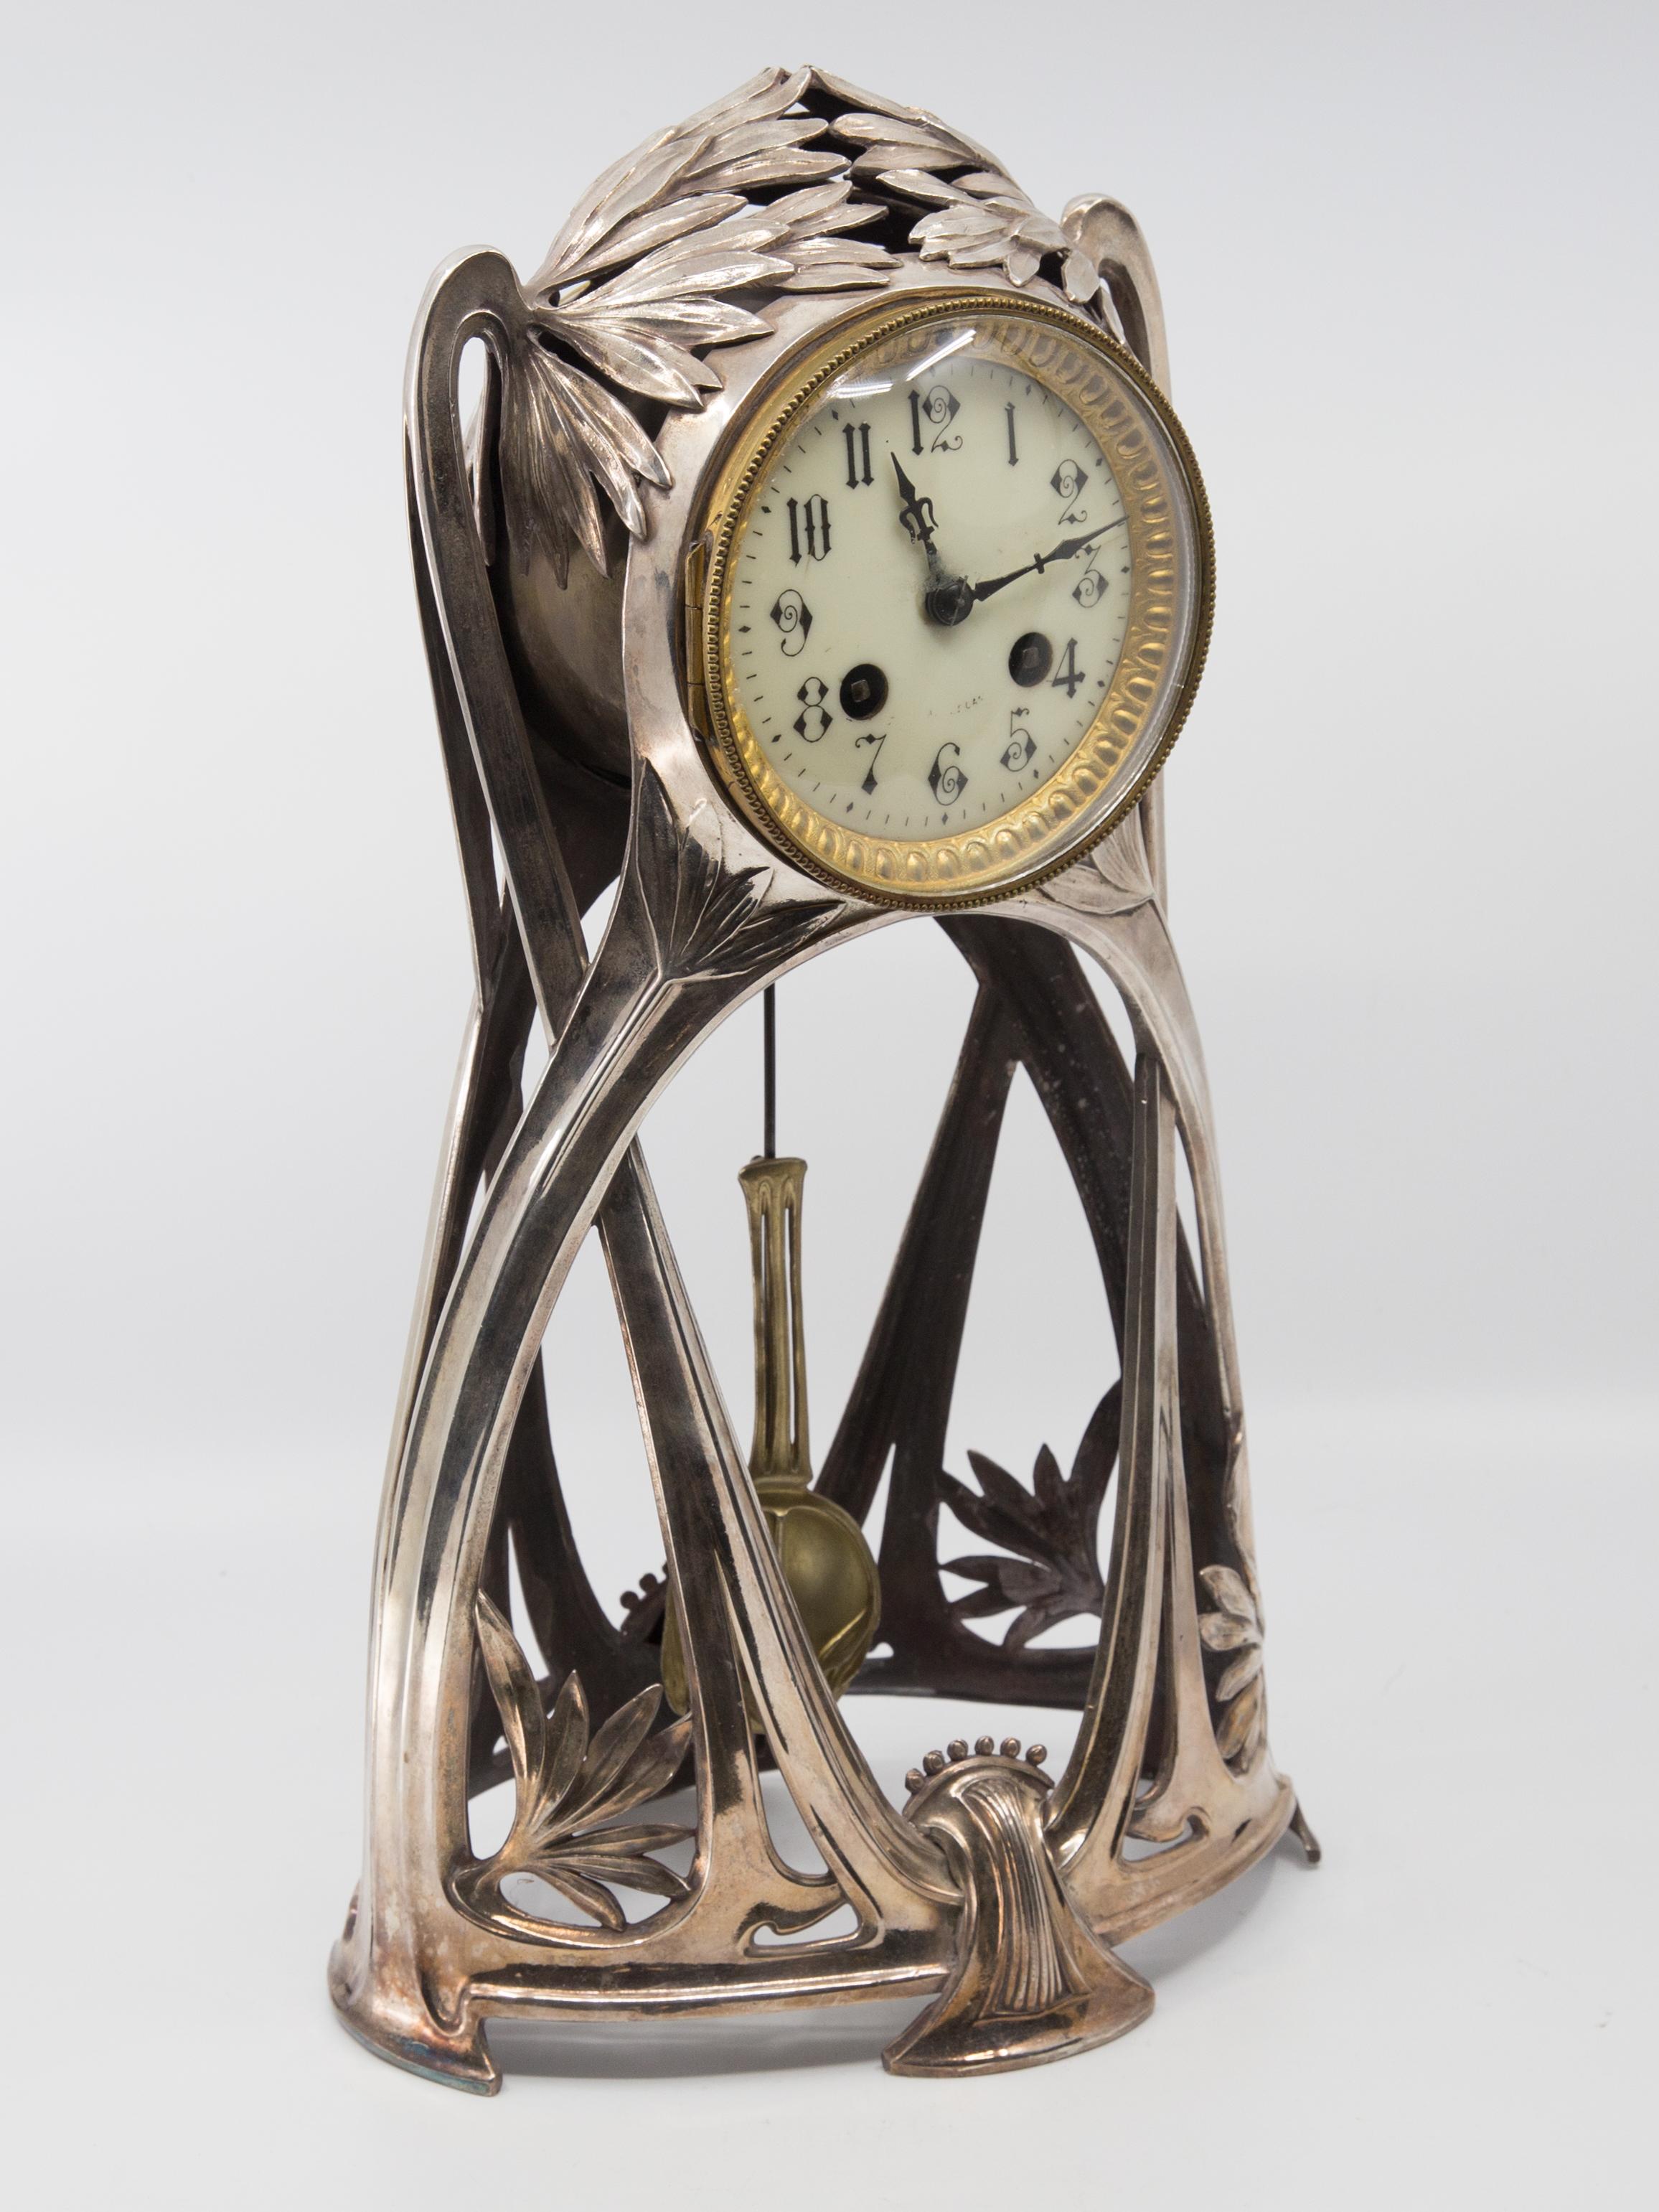 Offered is an exceptionally Art Nouveau silver plated multi metal clock. The body of the clock is silver plated. The clock’s bezel and pendulum are brass trimmed. The piece is really a sculptural and functional work of art. The clock is key wind